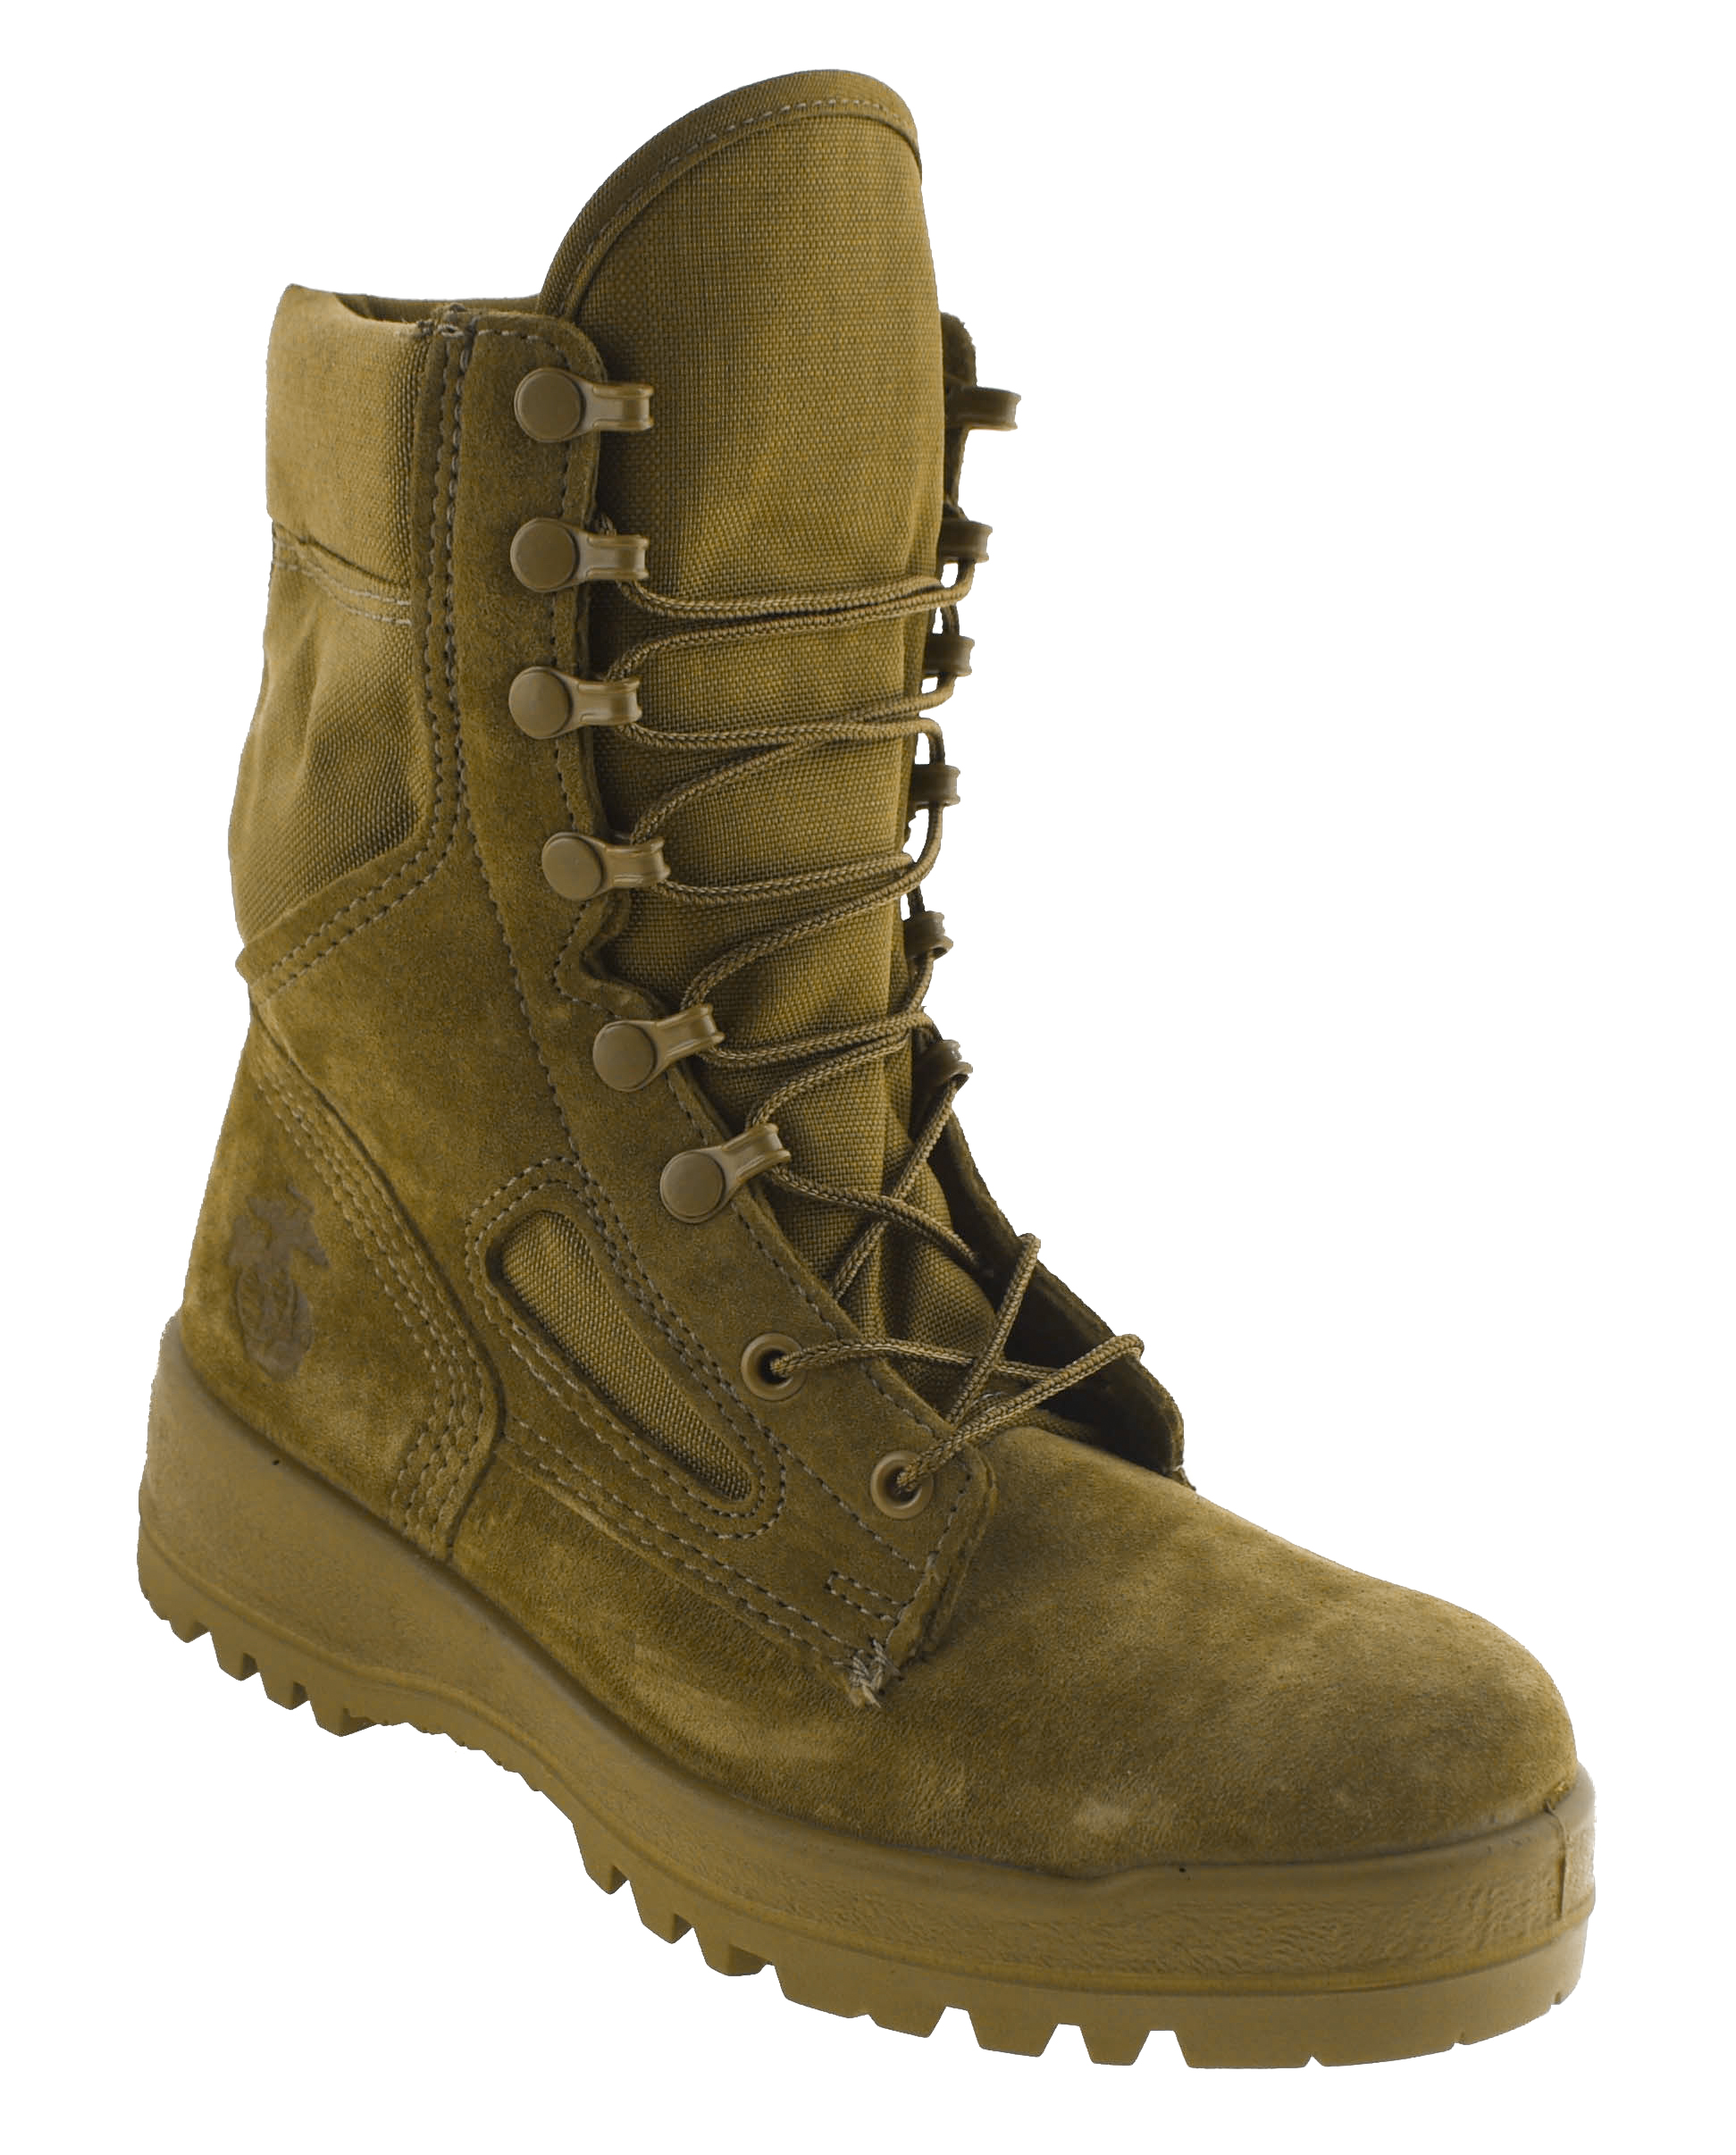 Bates Hot Weather Tactical Work Boots Olive E25502B